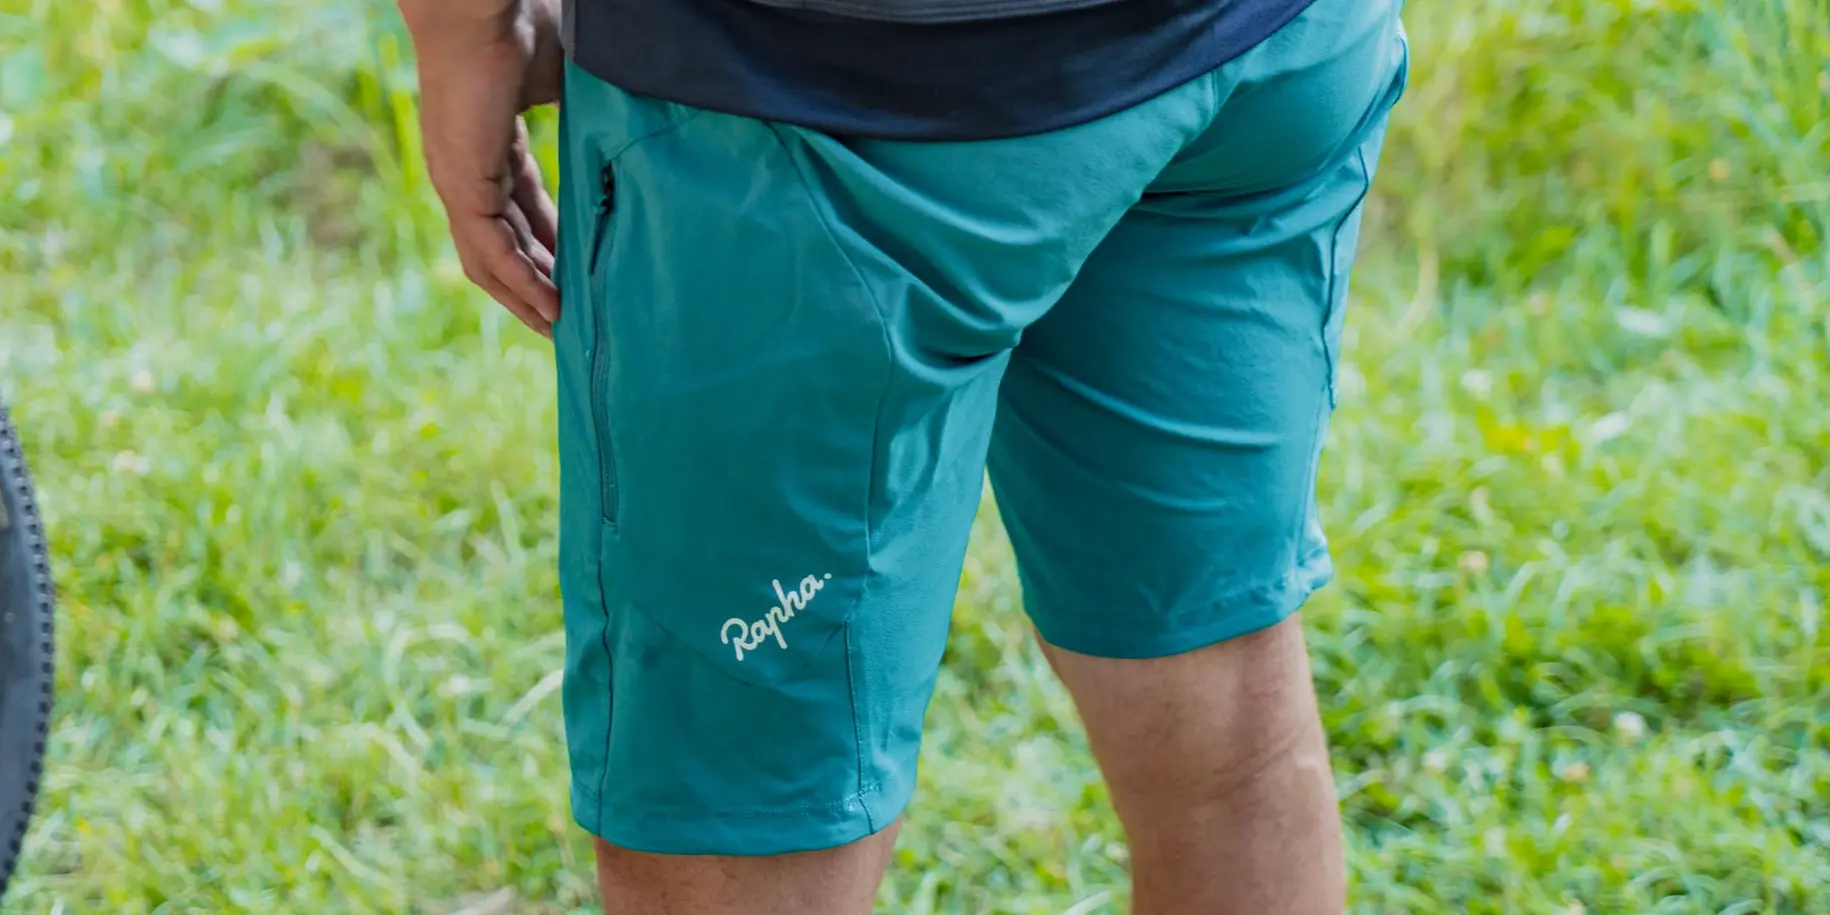 Rapha Trail Jersey, Cargo Liner Shorts & Trail Shorts in Review